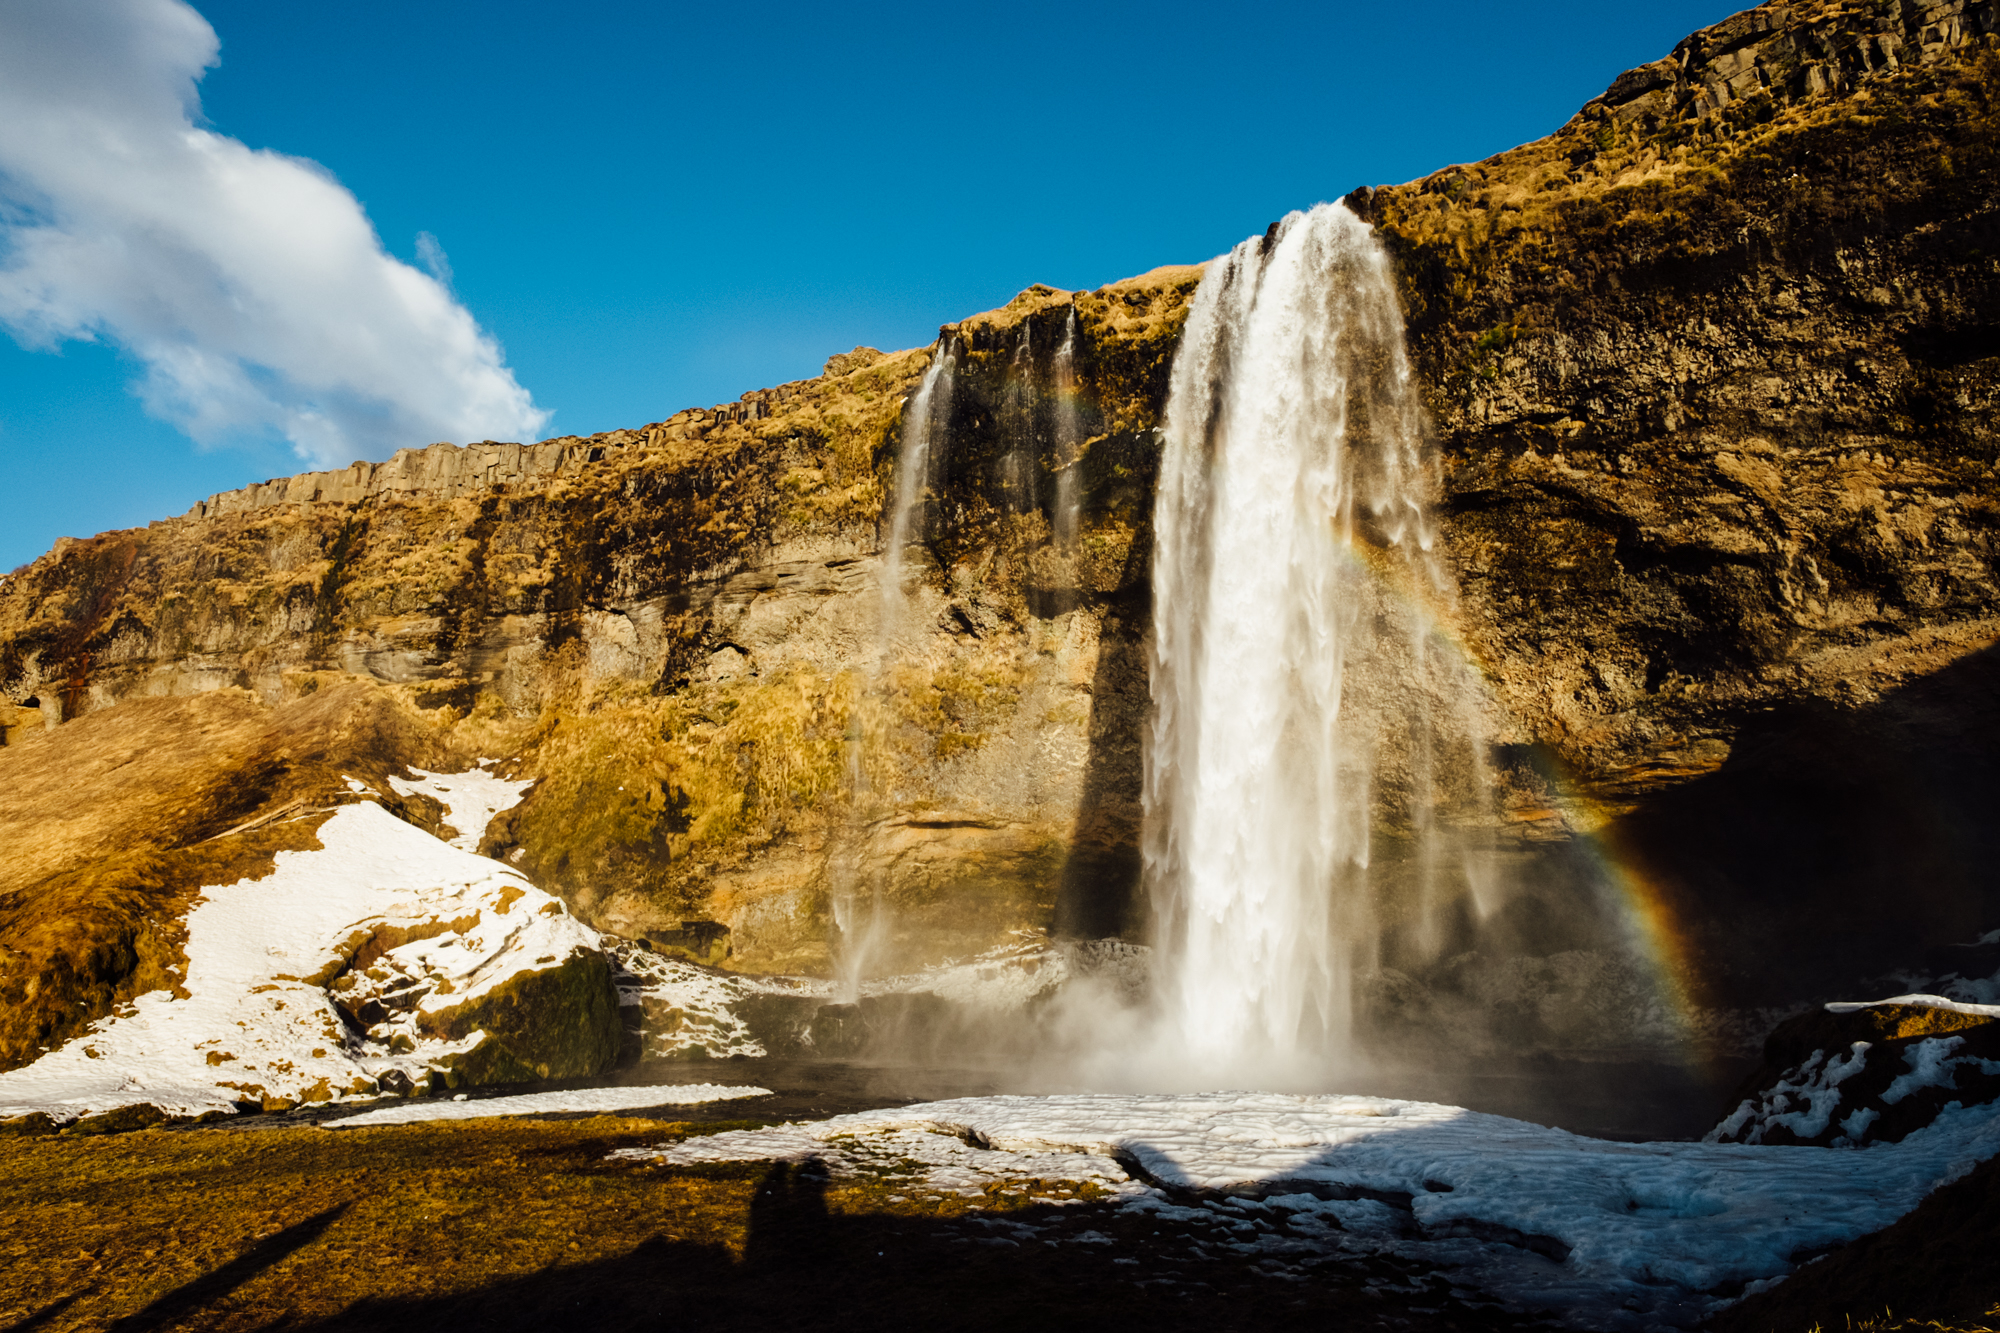  Our first stop was the Seljalandsfoss waterfall. We arrived here right as the sun was setting, so the light couldn’t have been more beautiful - a huge change from the cloudy weather that greeted us when our plane landed just a few hours prior. This 